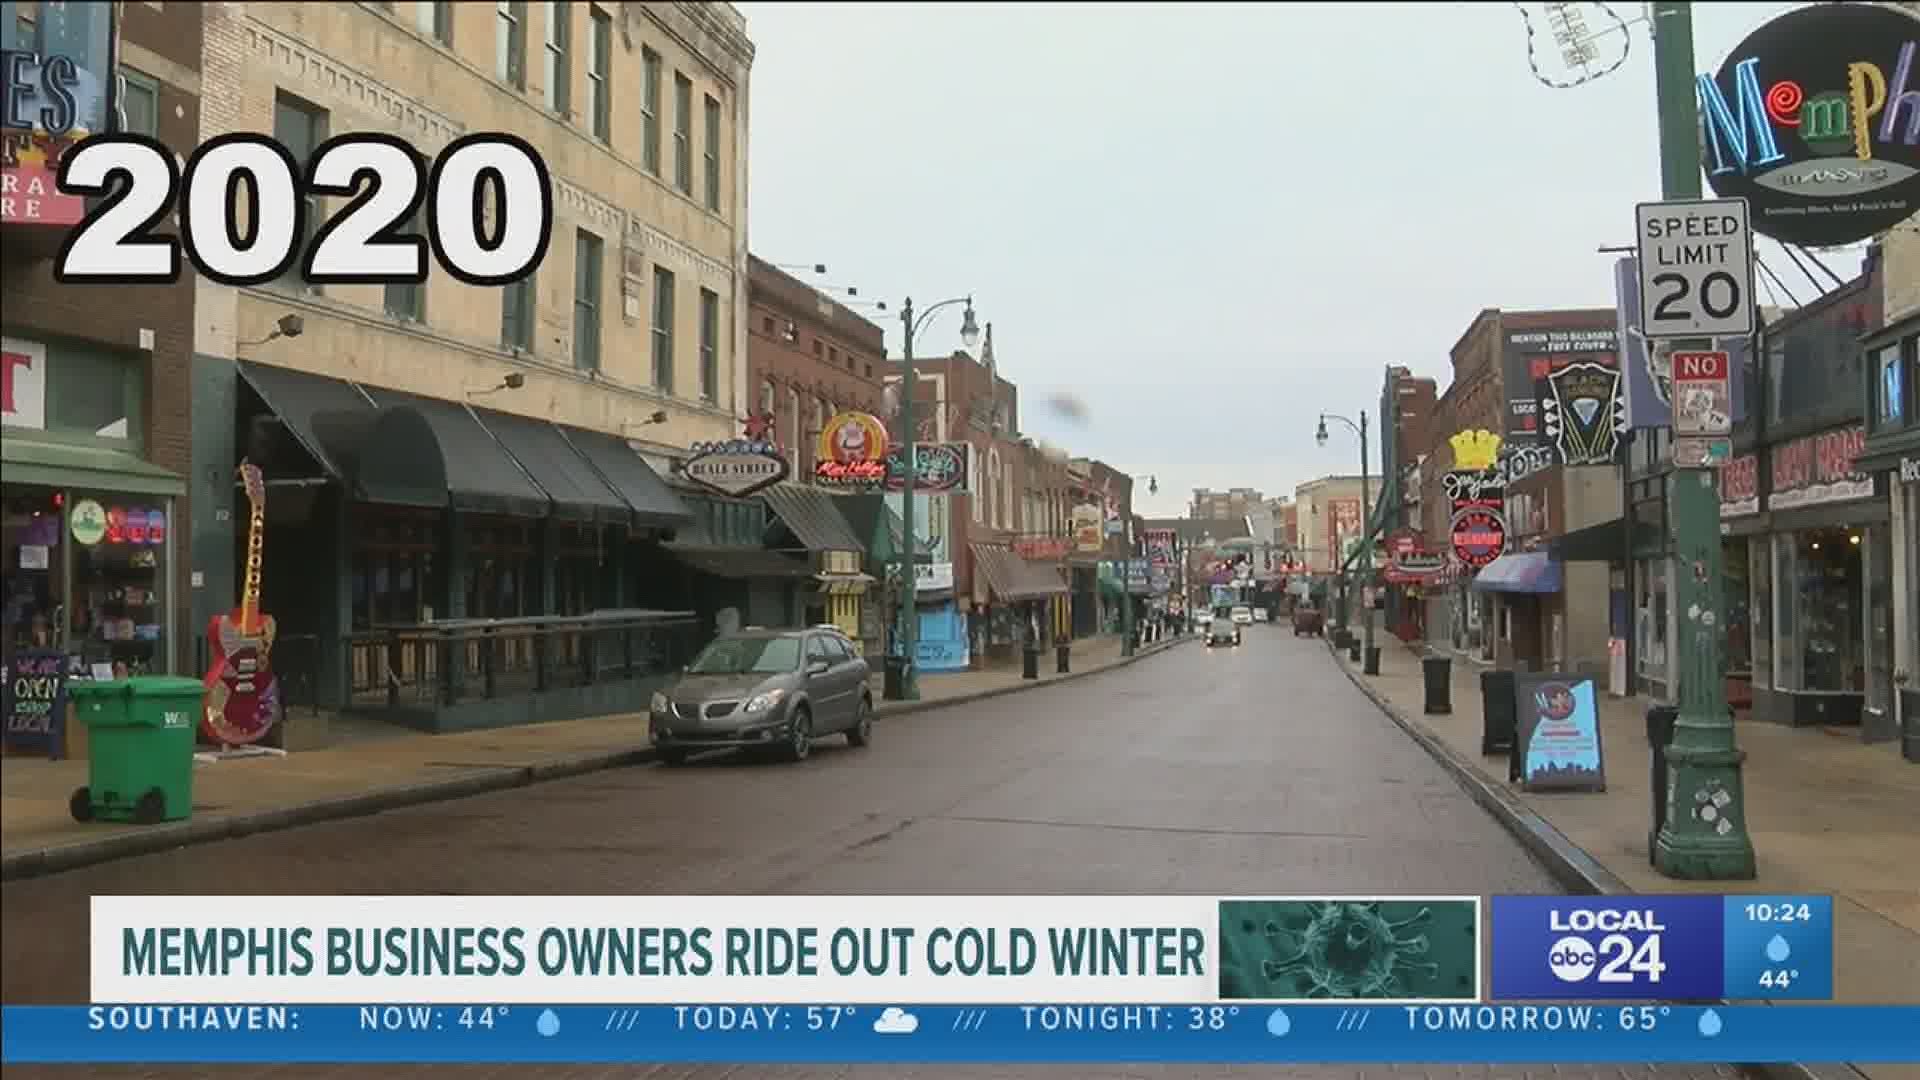 With the New Year in sight, Local 24 caught up with a business owner on Beale Street about how hard it has been this year during this pandemic.